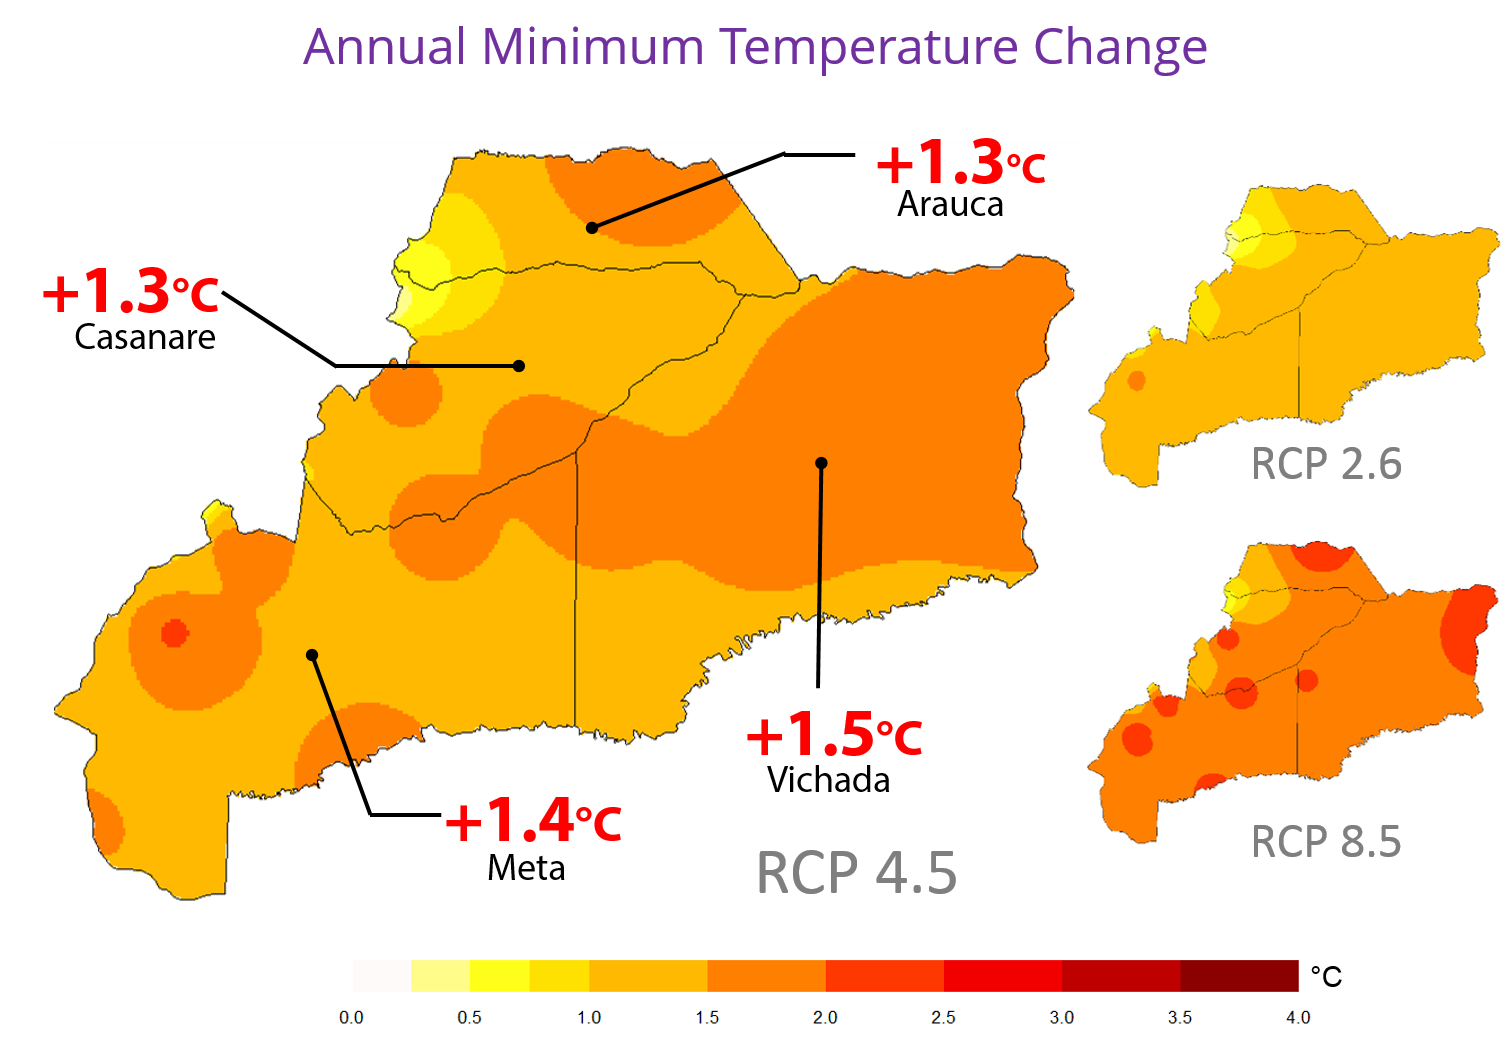 Projected changes in annual minimum temperature on Colombia’s Eastern Plains by 2040, for 3 emission scenarios: RCP 2.6 (optimistic), 4.5 (intermediate) y 8.5 (pessimist).